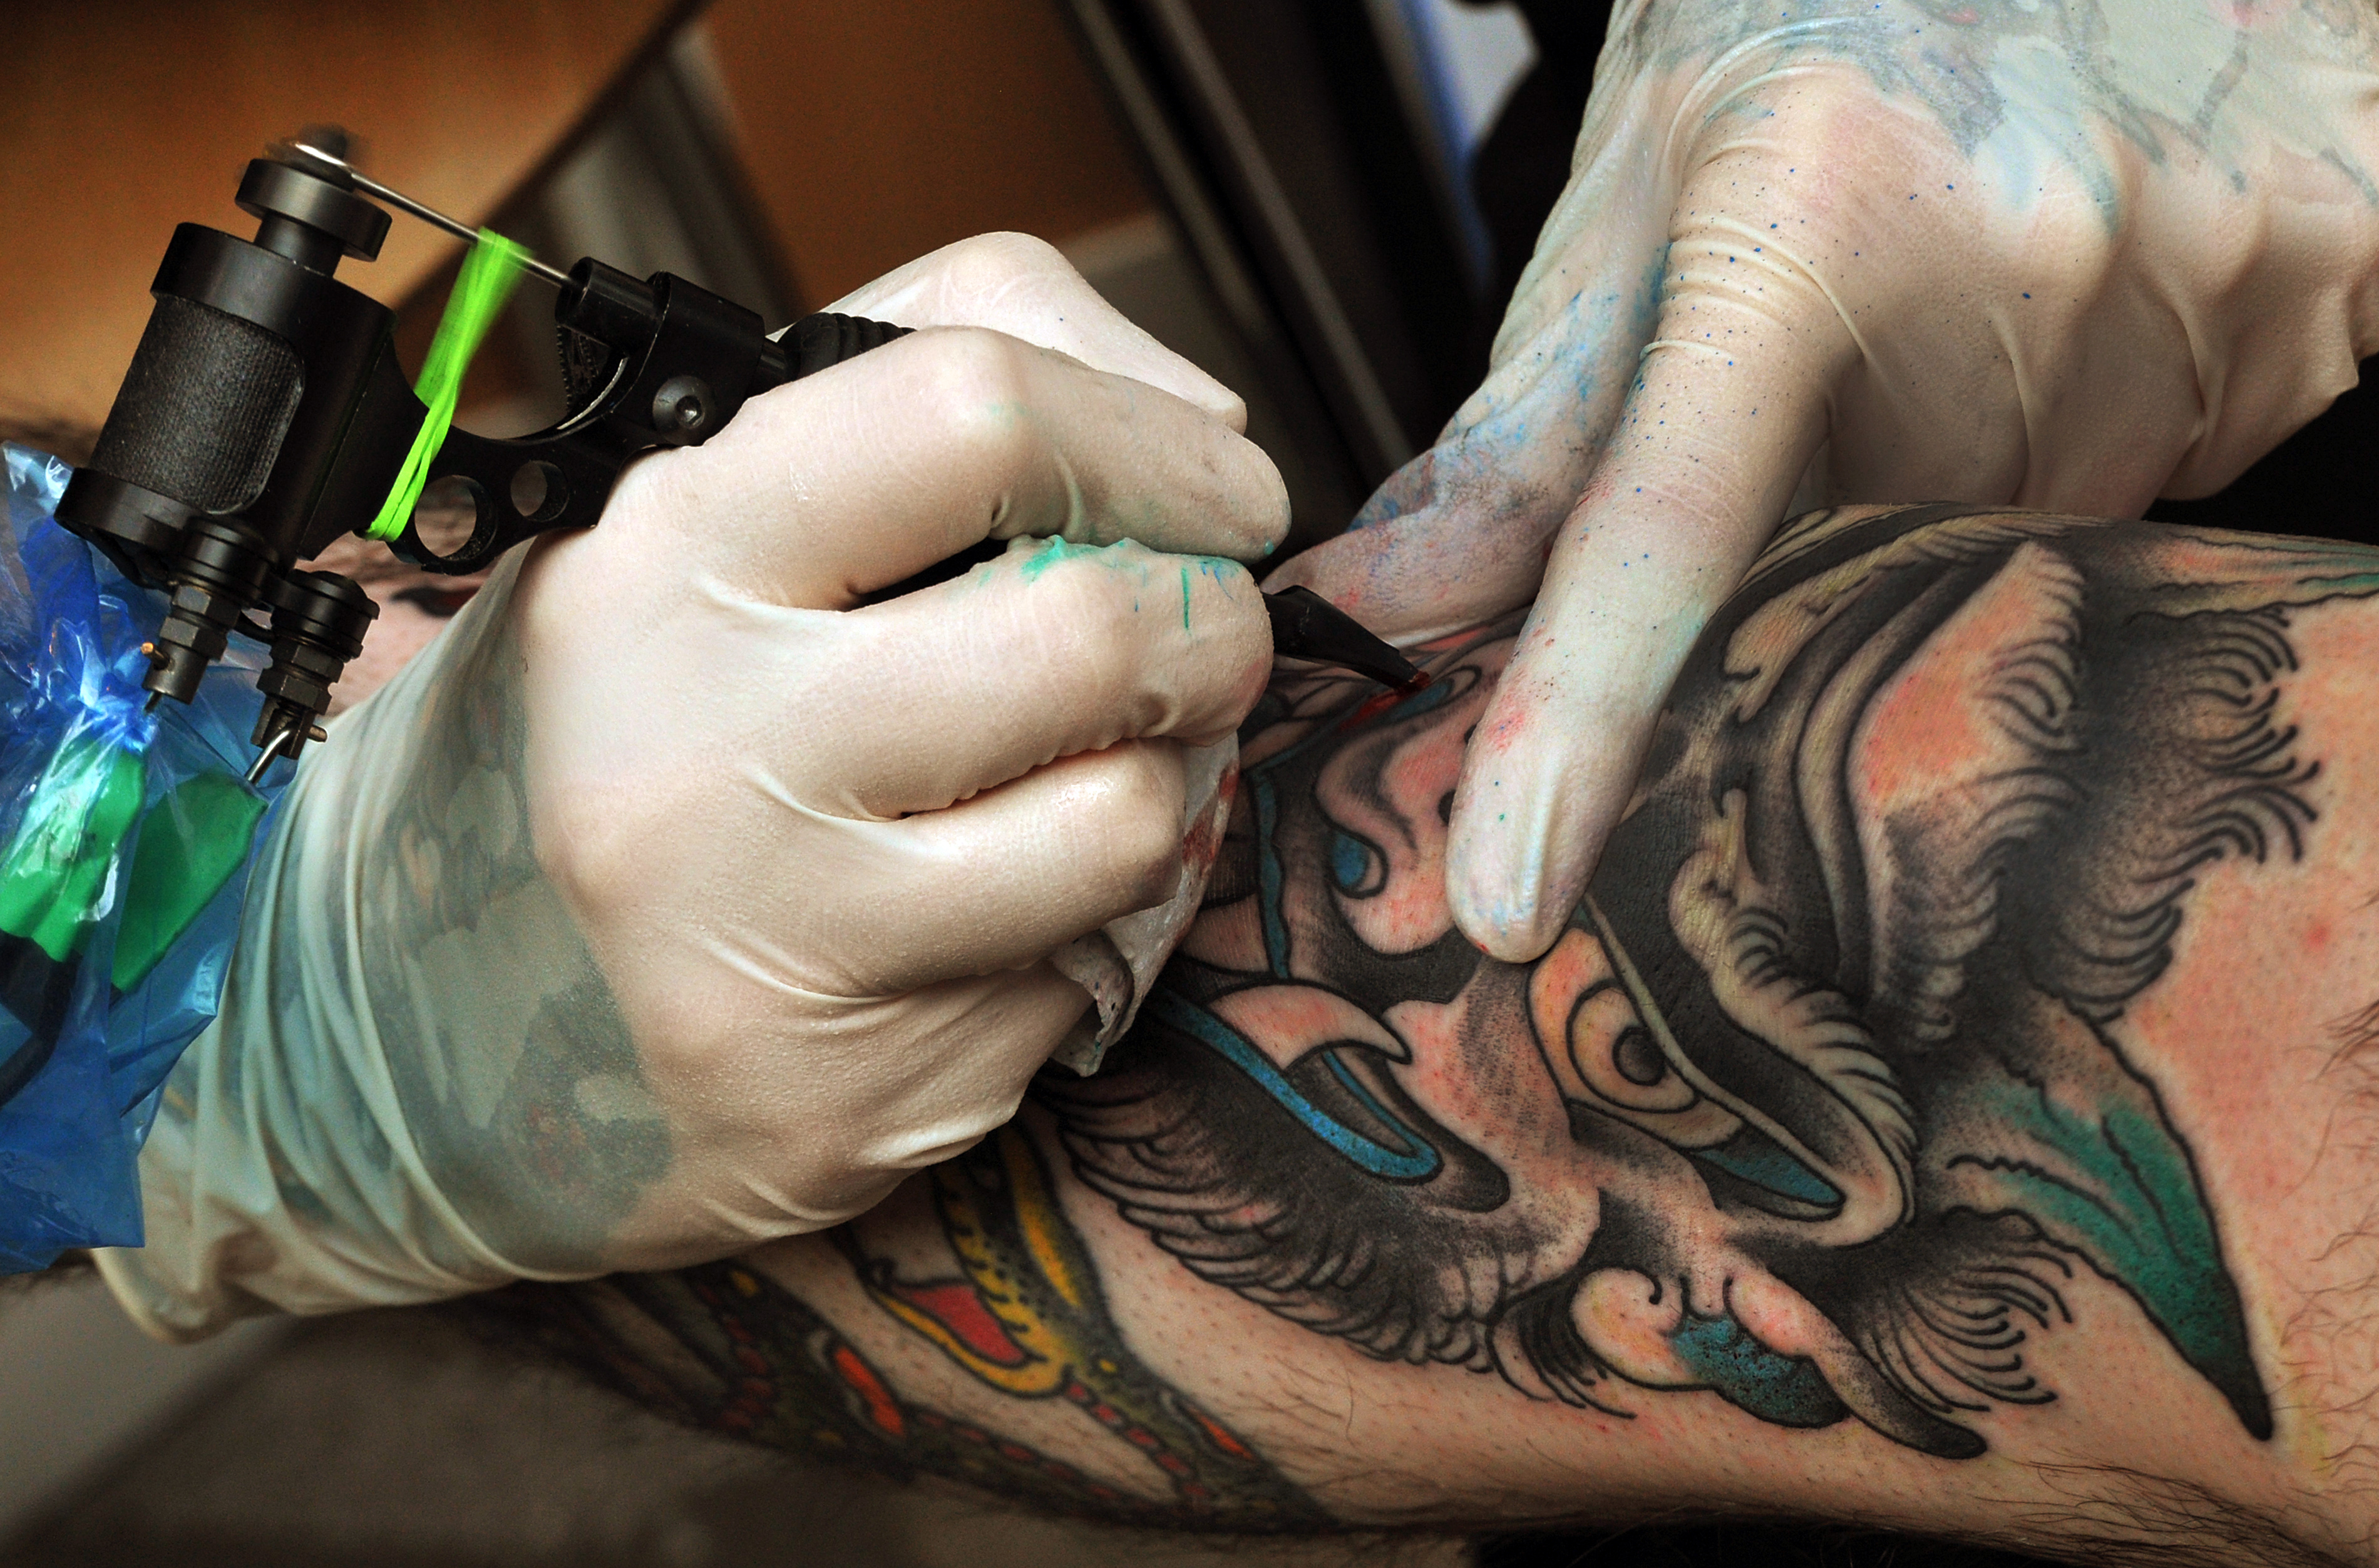 FDA: Contaminated tattoo ink causing infections - CBS News